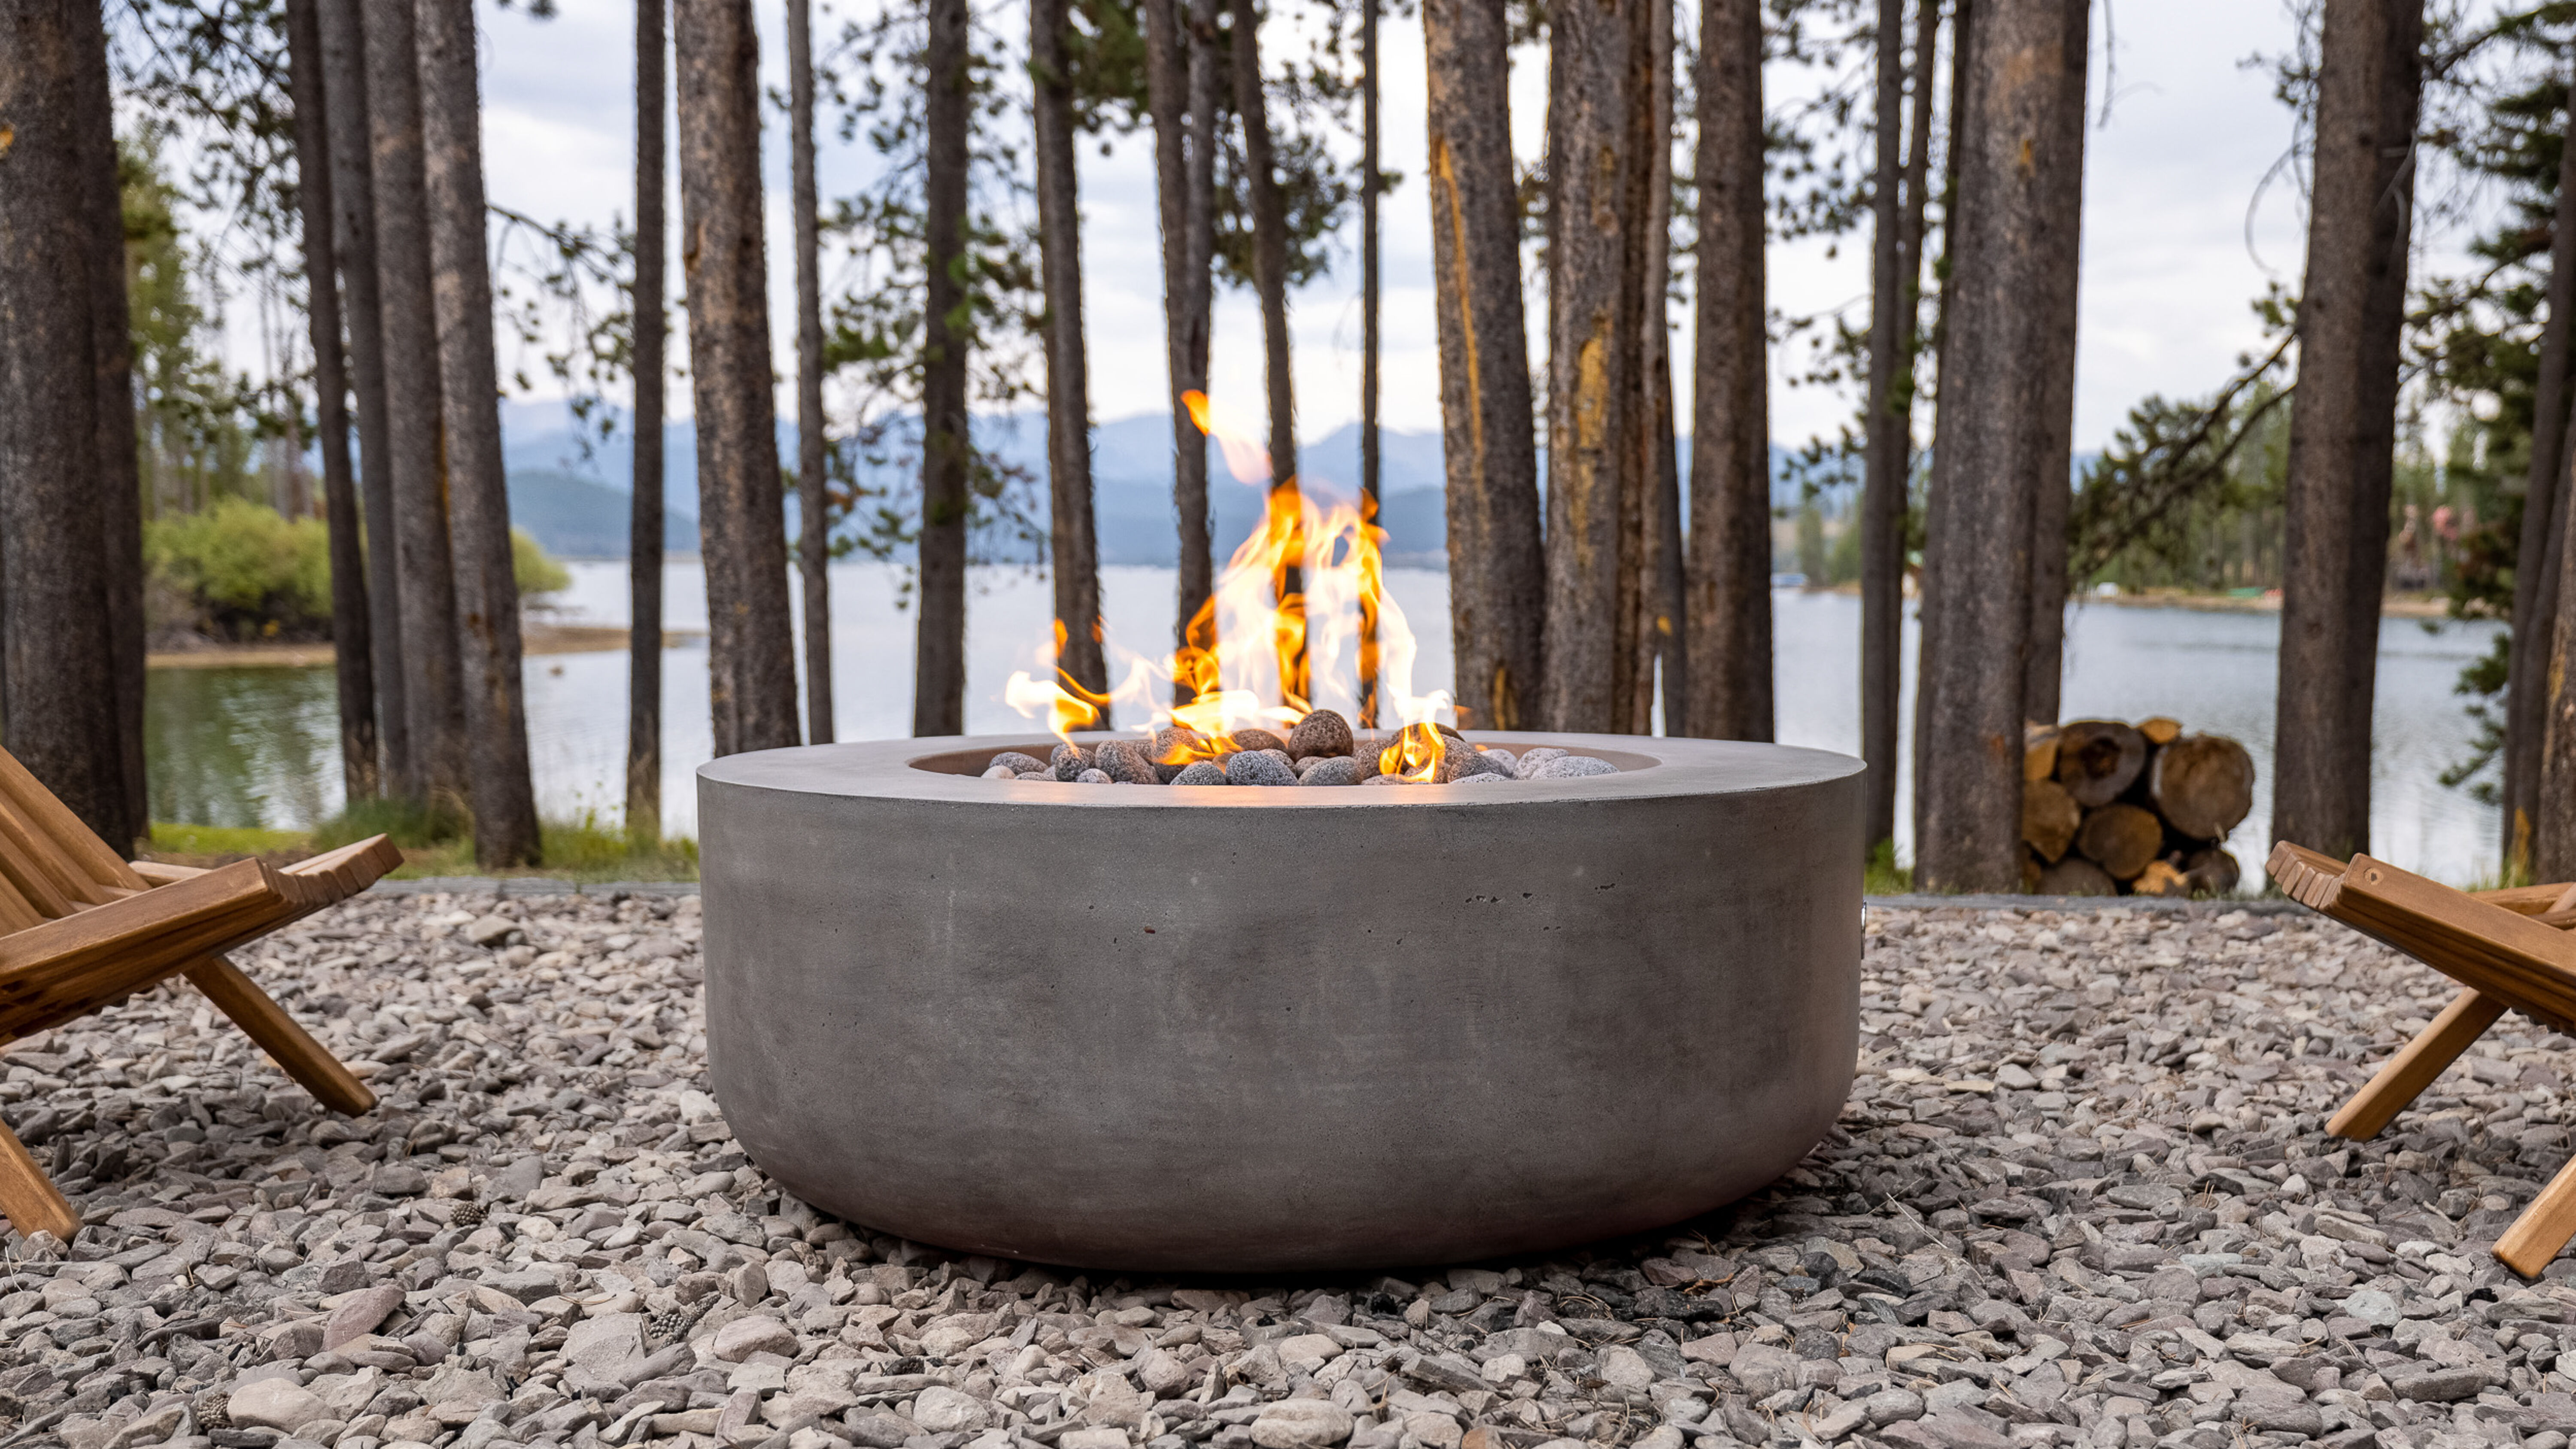 An outdoor lounge area with tall trees and a lake in the background, two wooden lounge chairs, and a large, concrete gas fire pit with rolled lava stones.